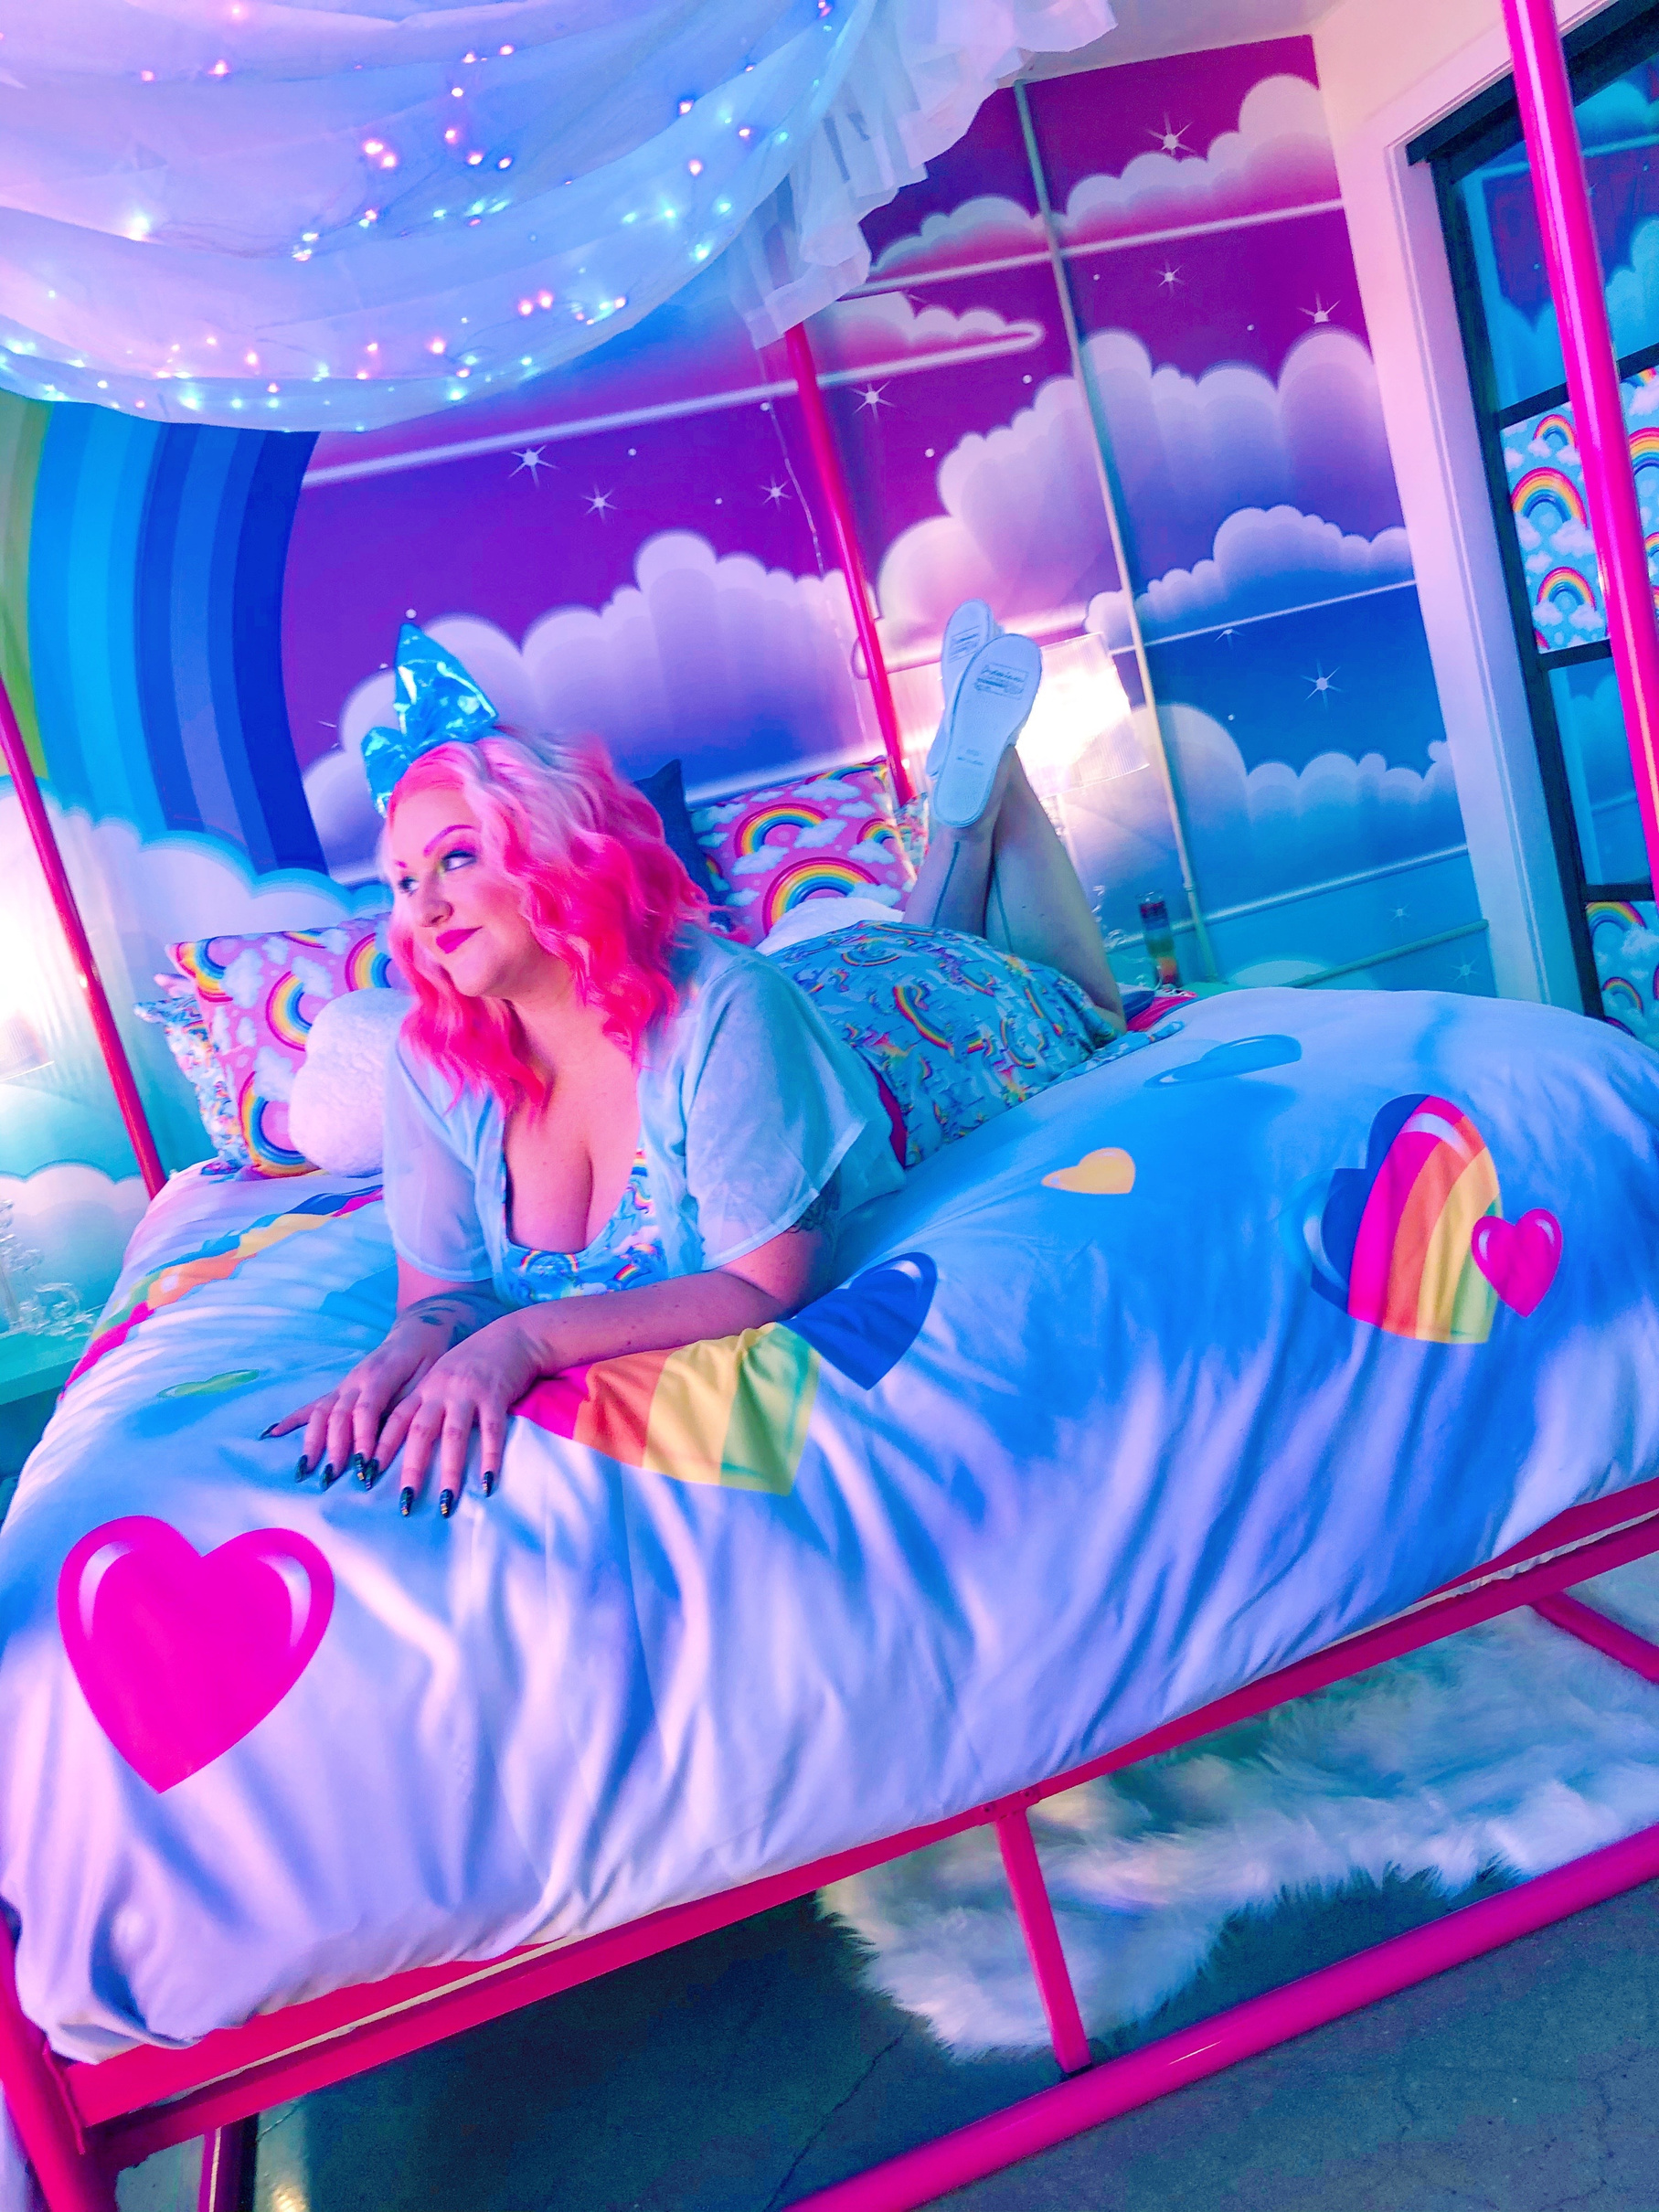 roxy tart with pink hair laying on a bed in a lisa frank bedroom